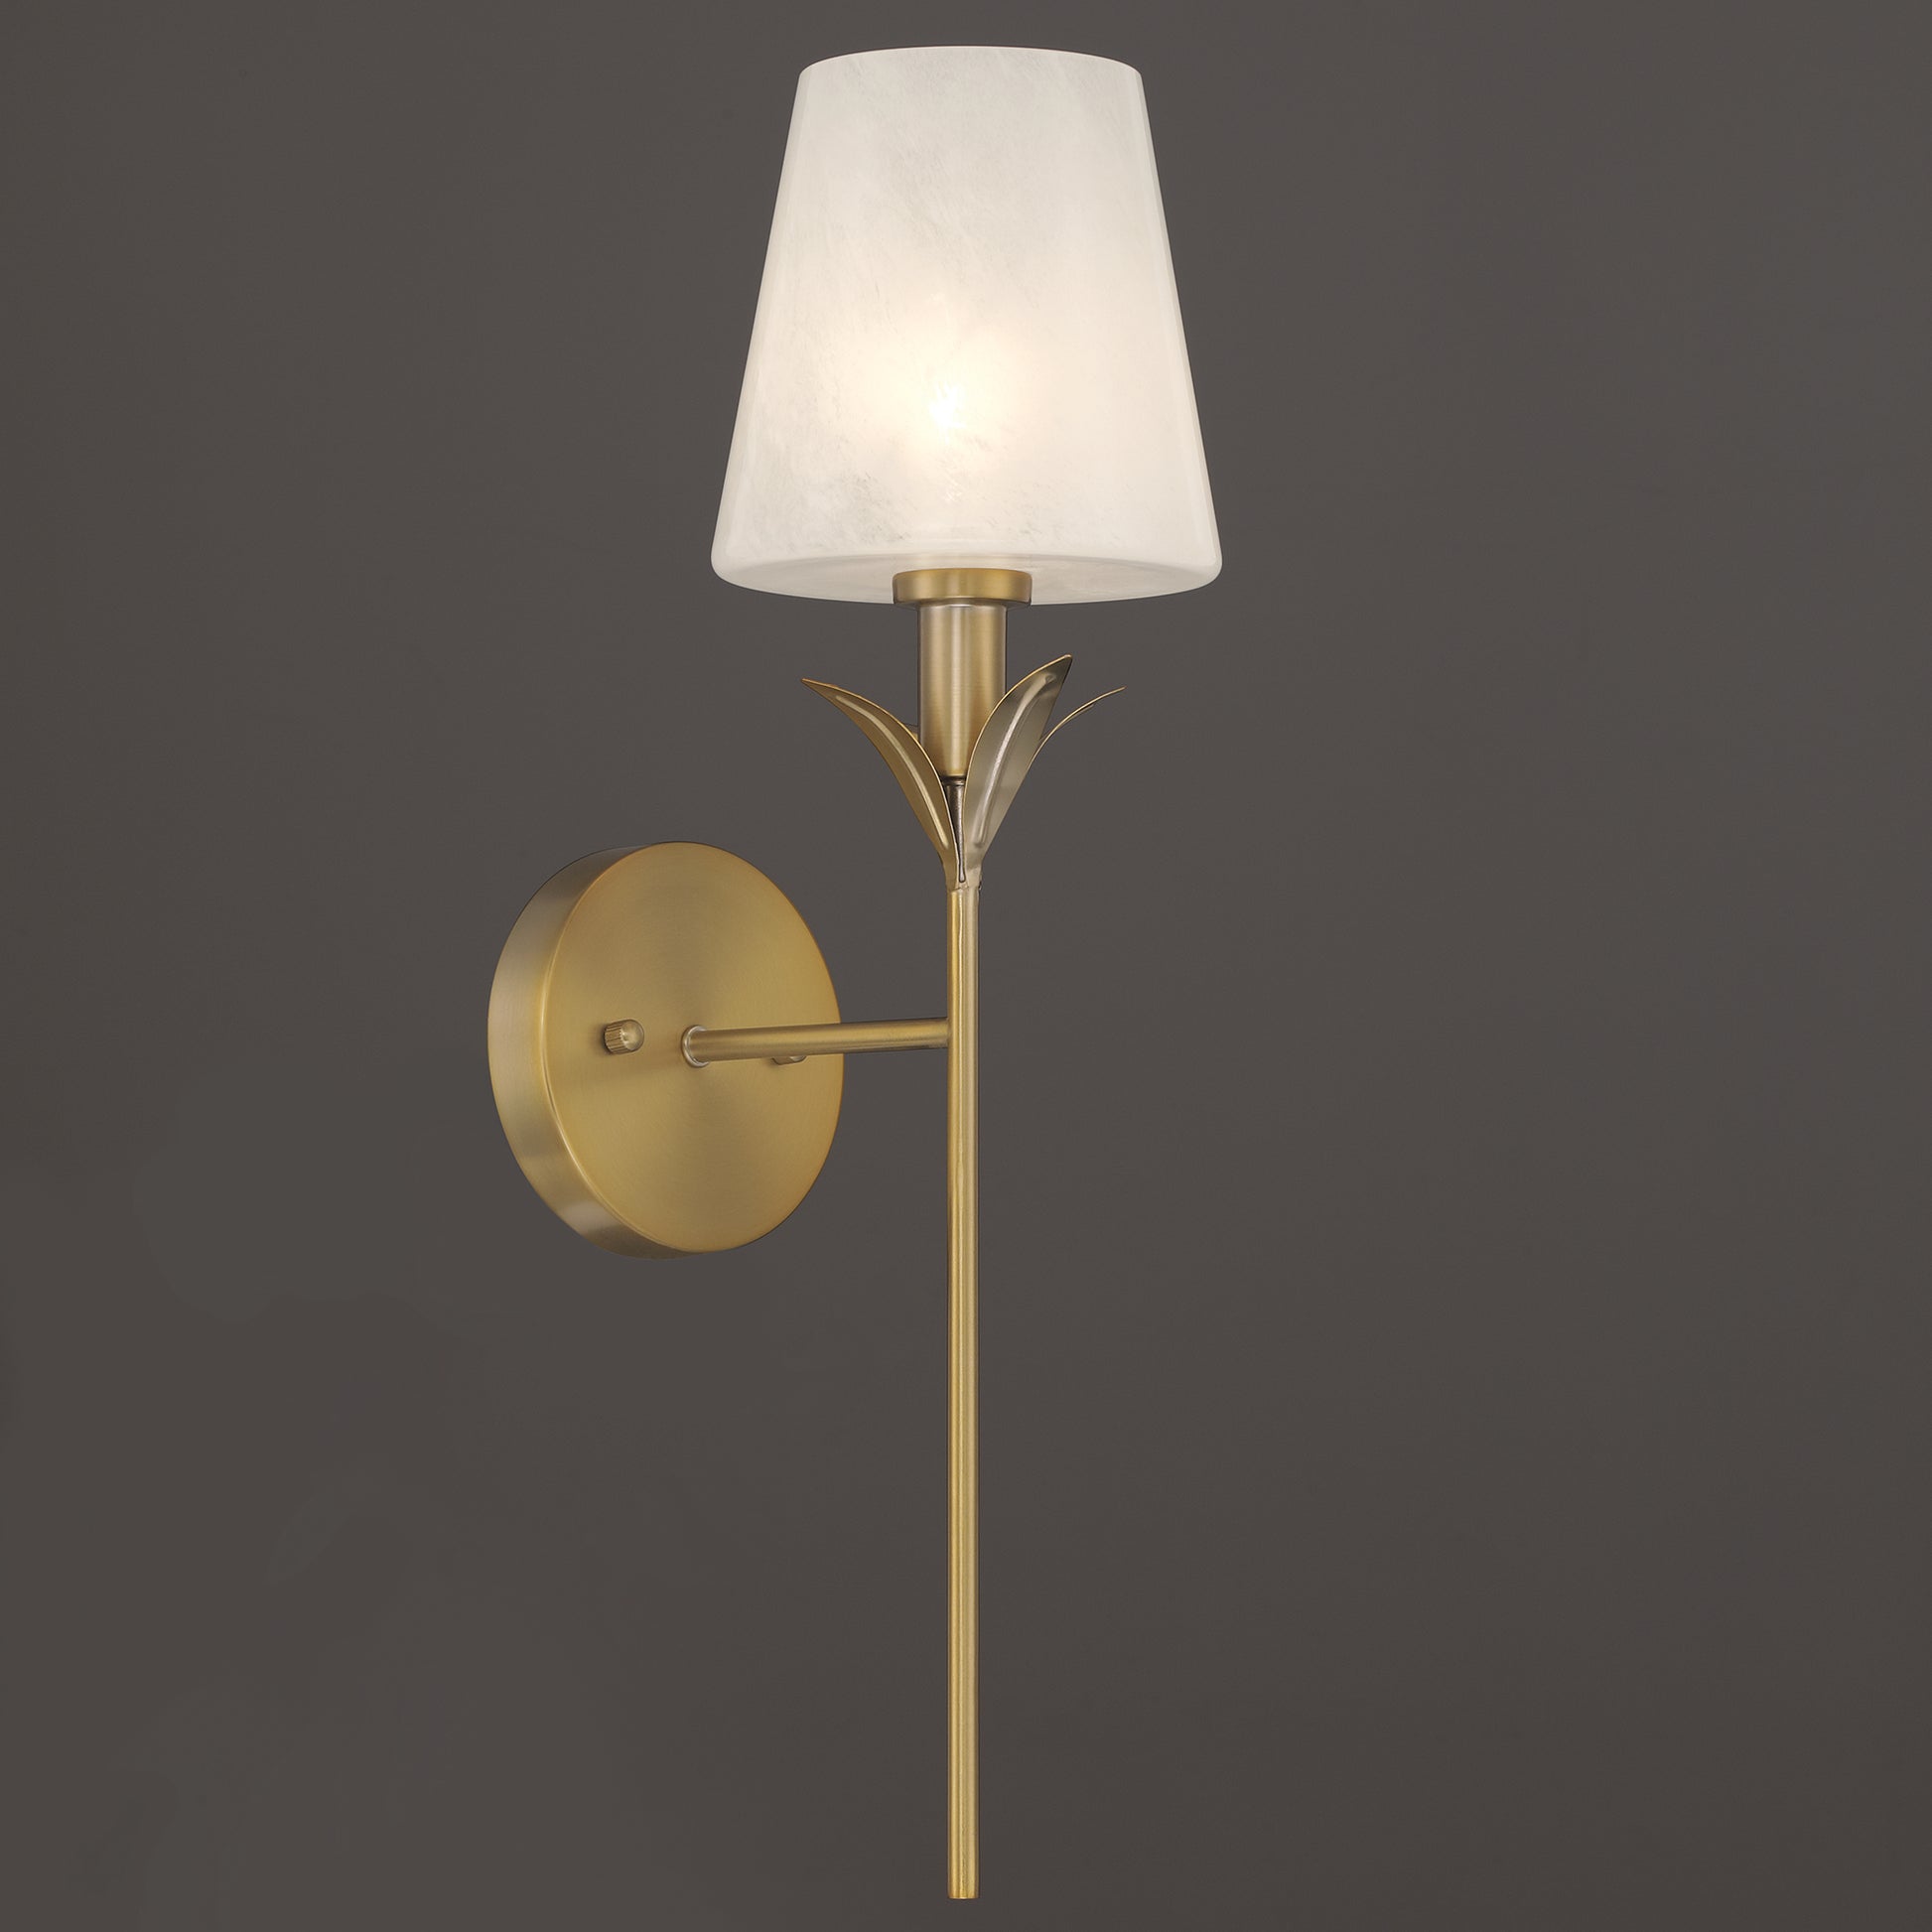 1 light vintage gold wallchiere (10) by ACROMA